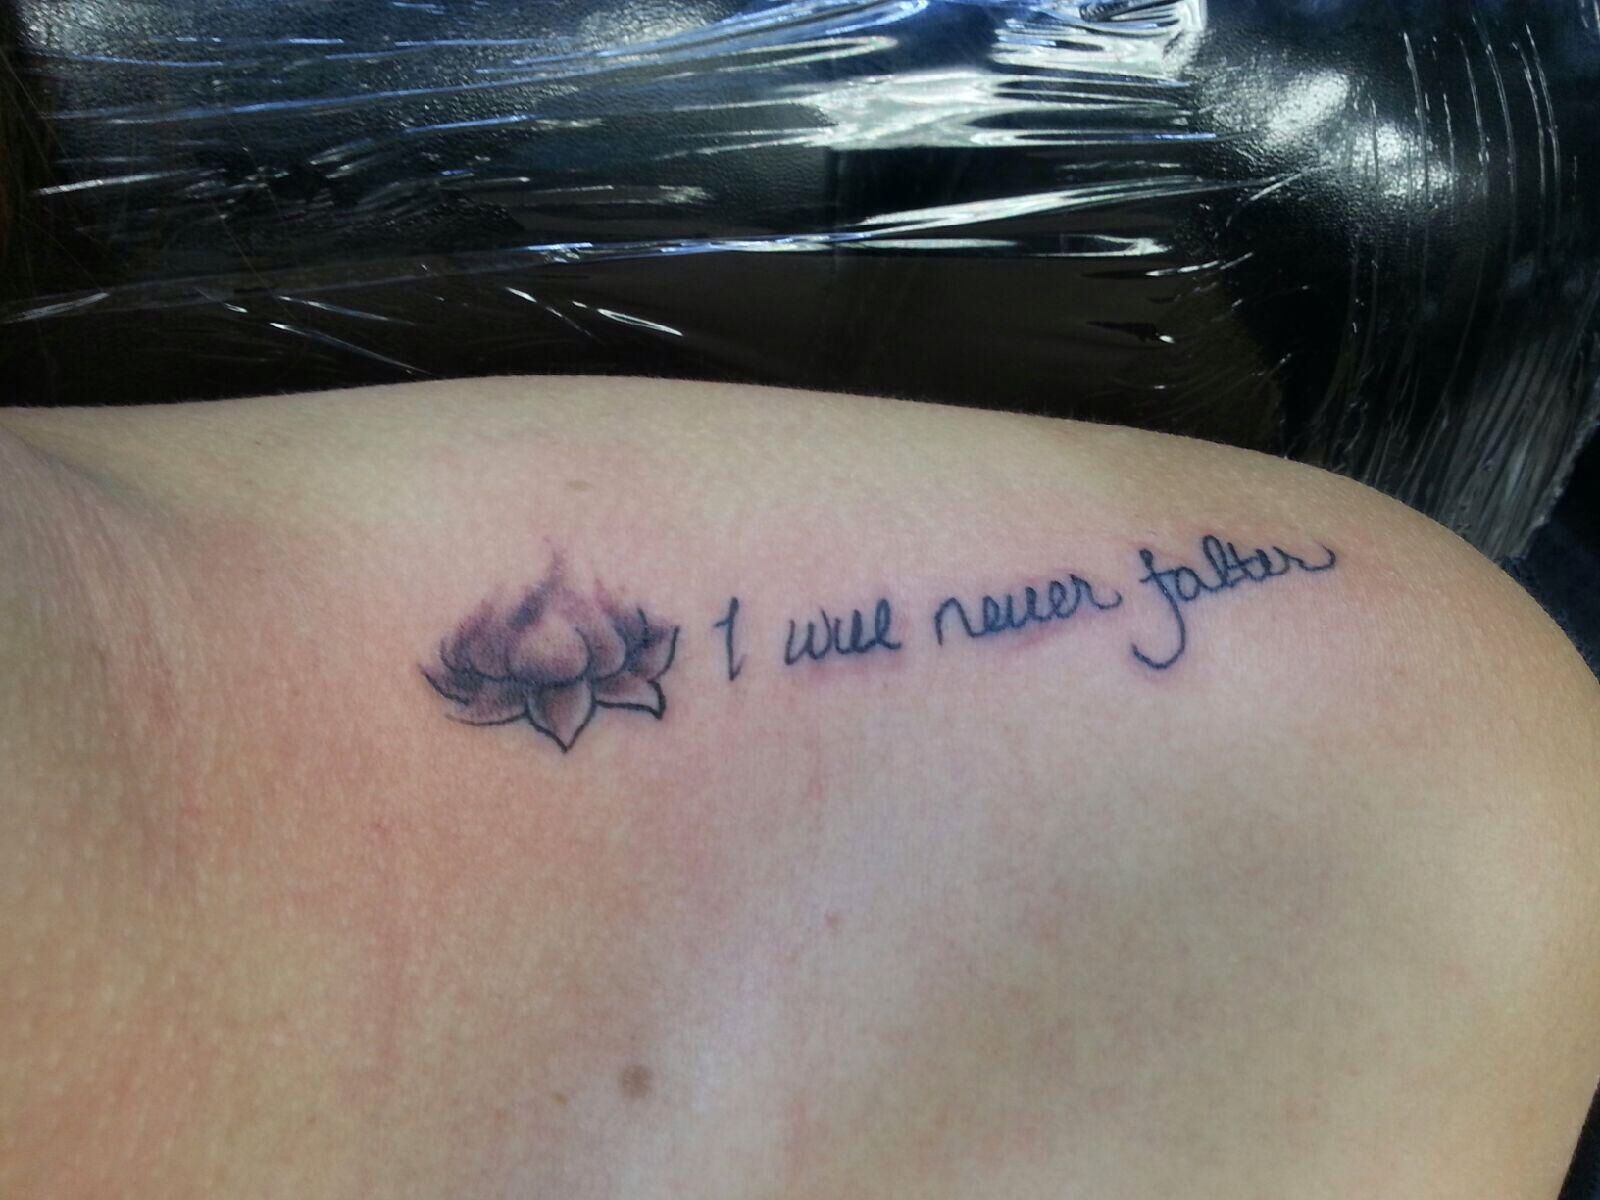 This Is Perfect Small Lotus With Script Tattoo I Will Never Falter intended for dimensions 1600 X 1200